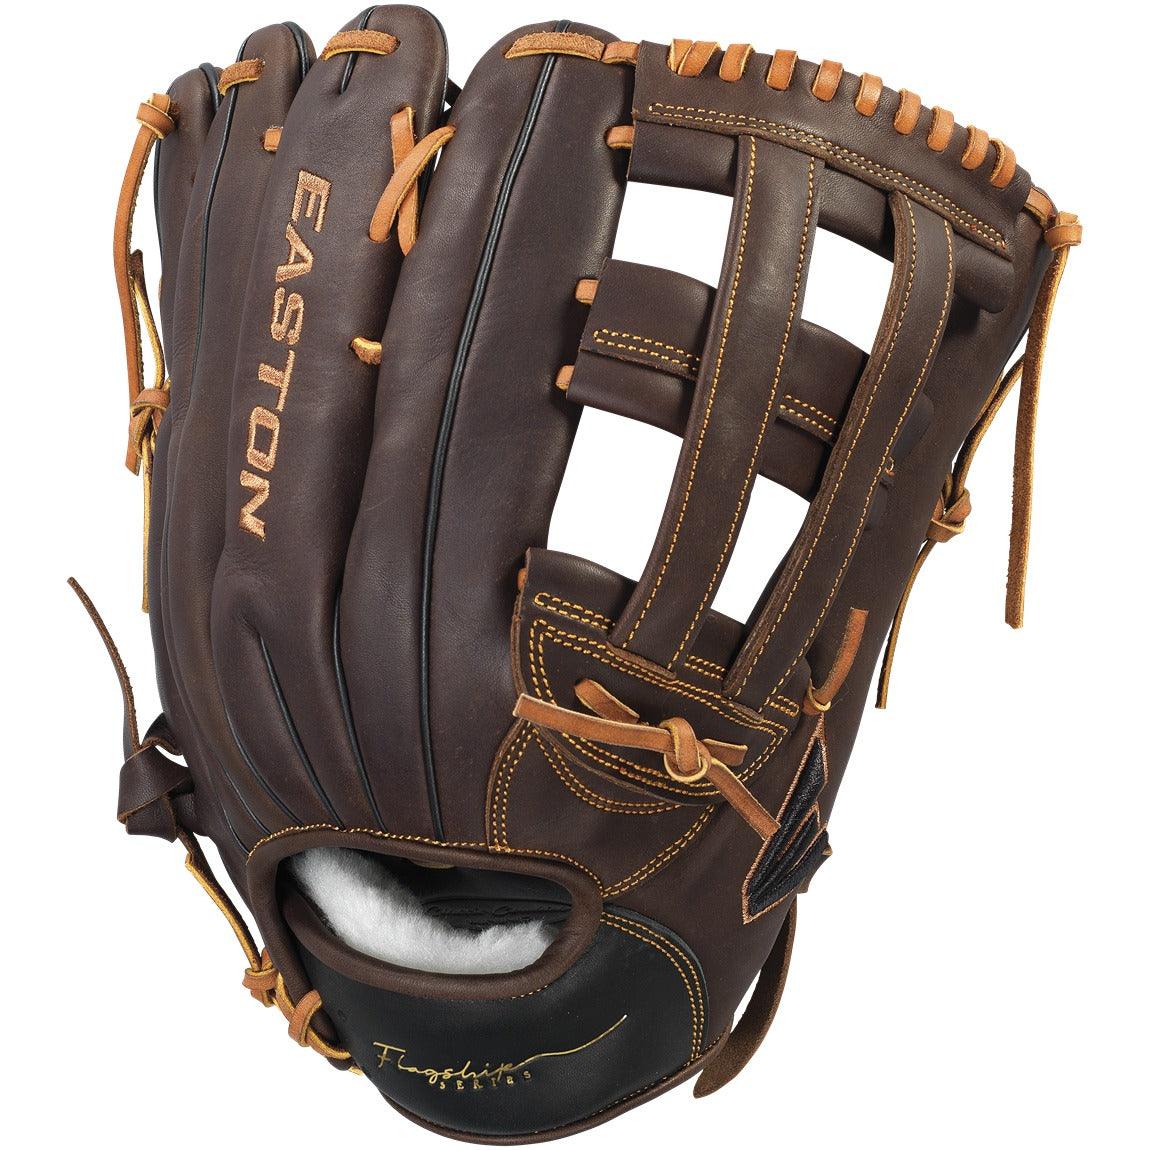 Flagship 12.75" Baseball Glove - Sports Excellence